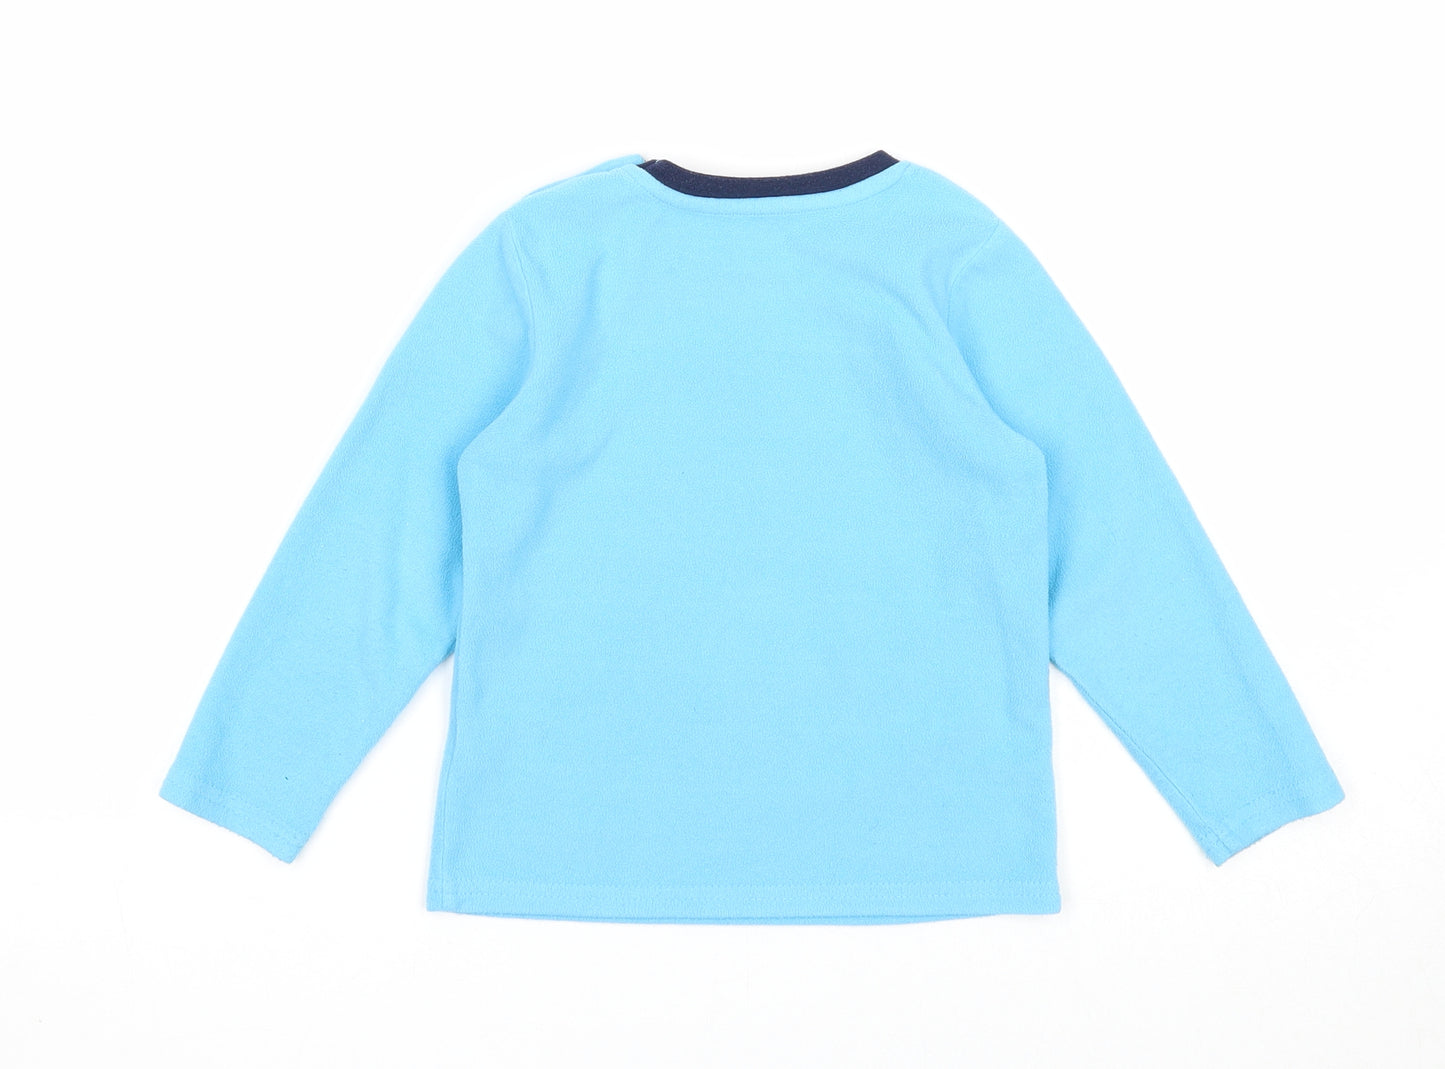 Primark Boys Blue Round Neck Polyester Pullover Jumper Size 2-3 Years Button - Roarsome Everyday